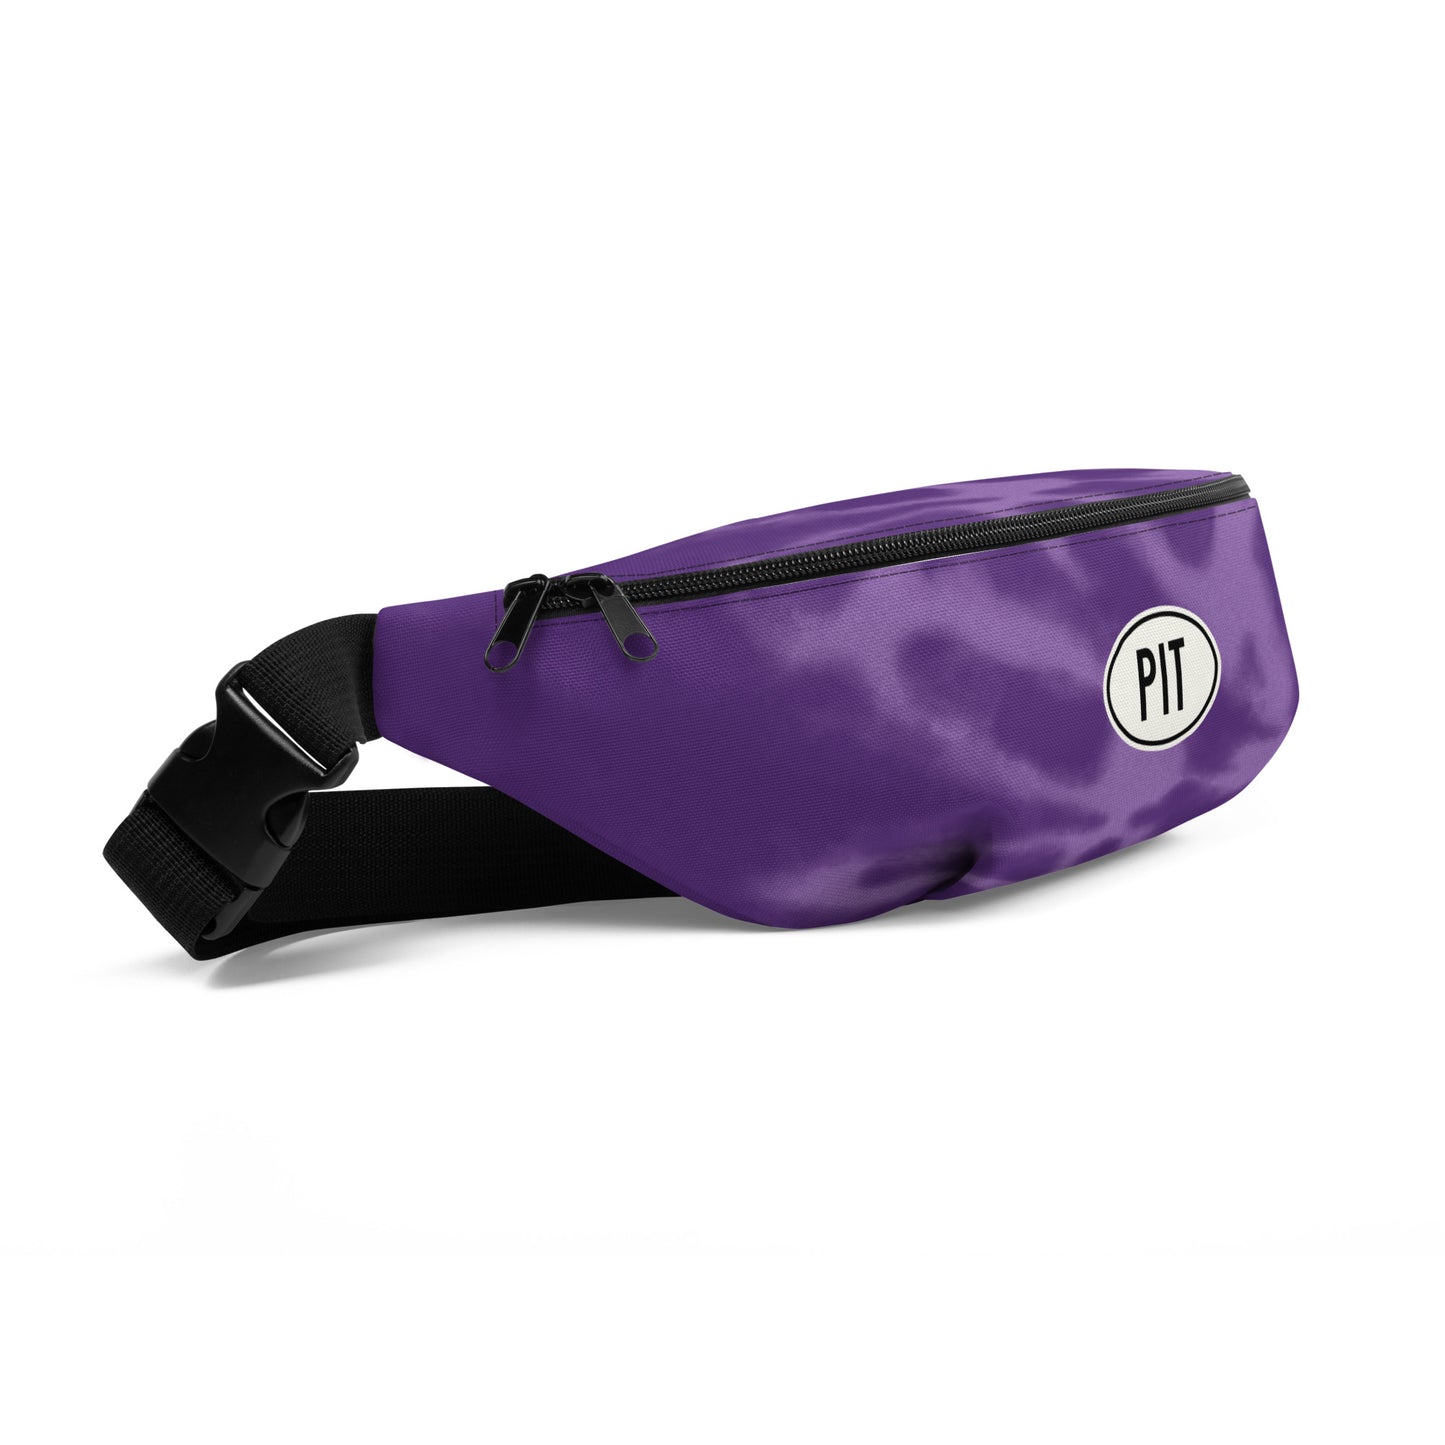 Travel Gift Fanny Pack - Purple Tie-Dye • PIT Pittsburgh • YHM Designs - Image 07